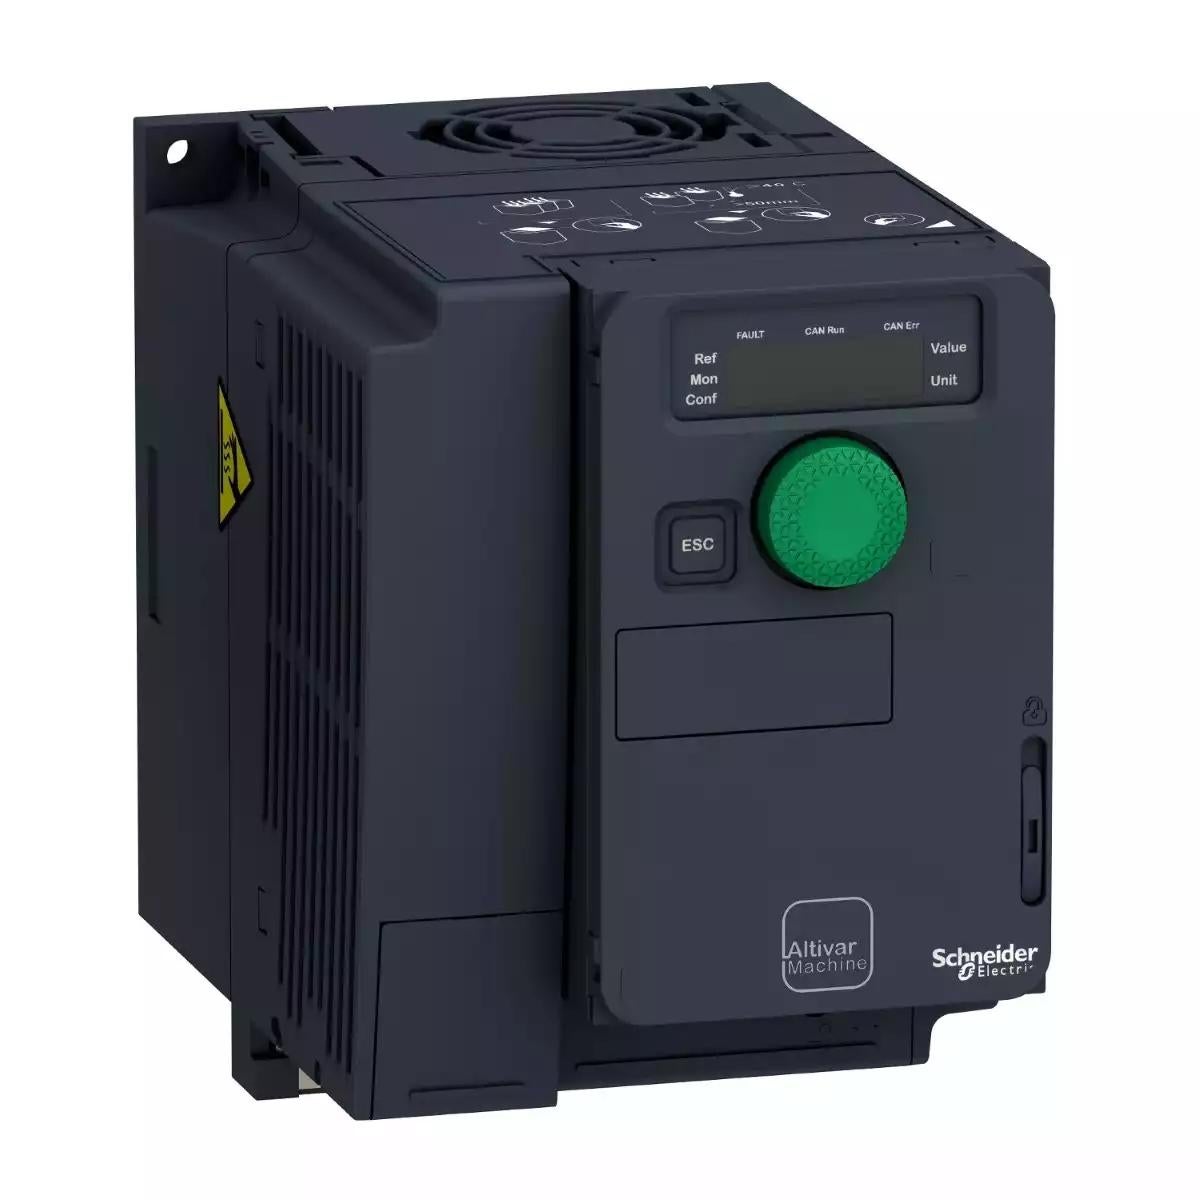 variable speed drive, Altivar Machine ATV320, 1.5kW, 380 to 500V, 3 phases, compact